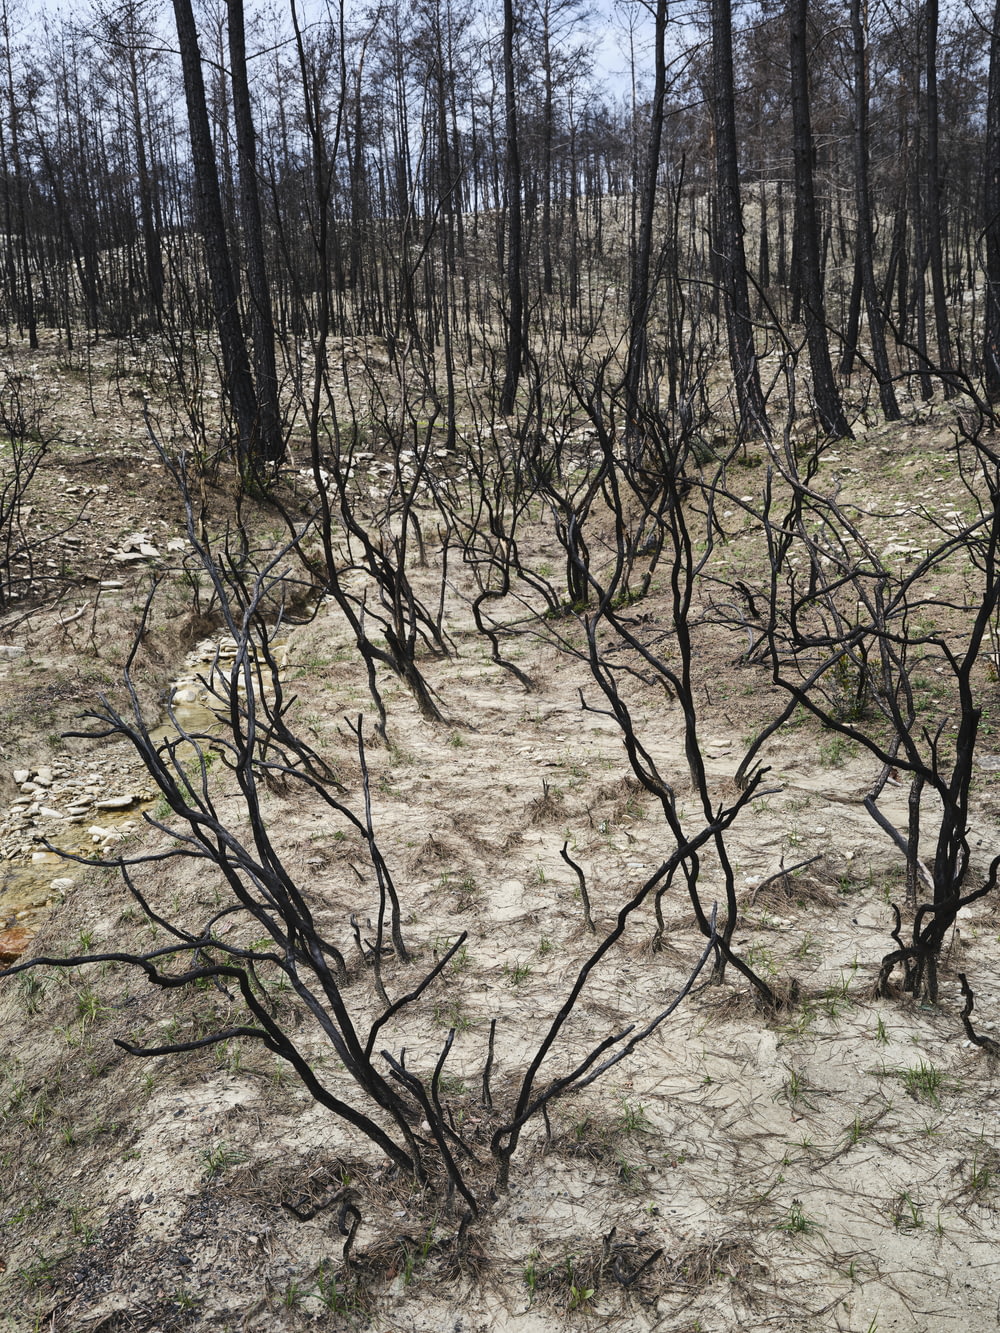 dead trees in the middle of a burned forest